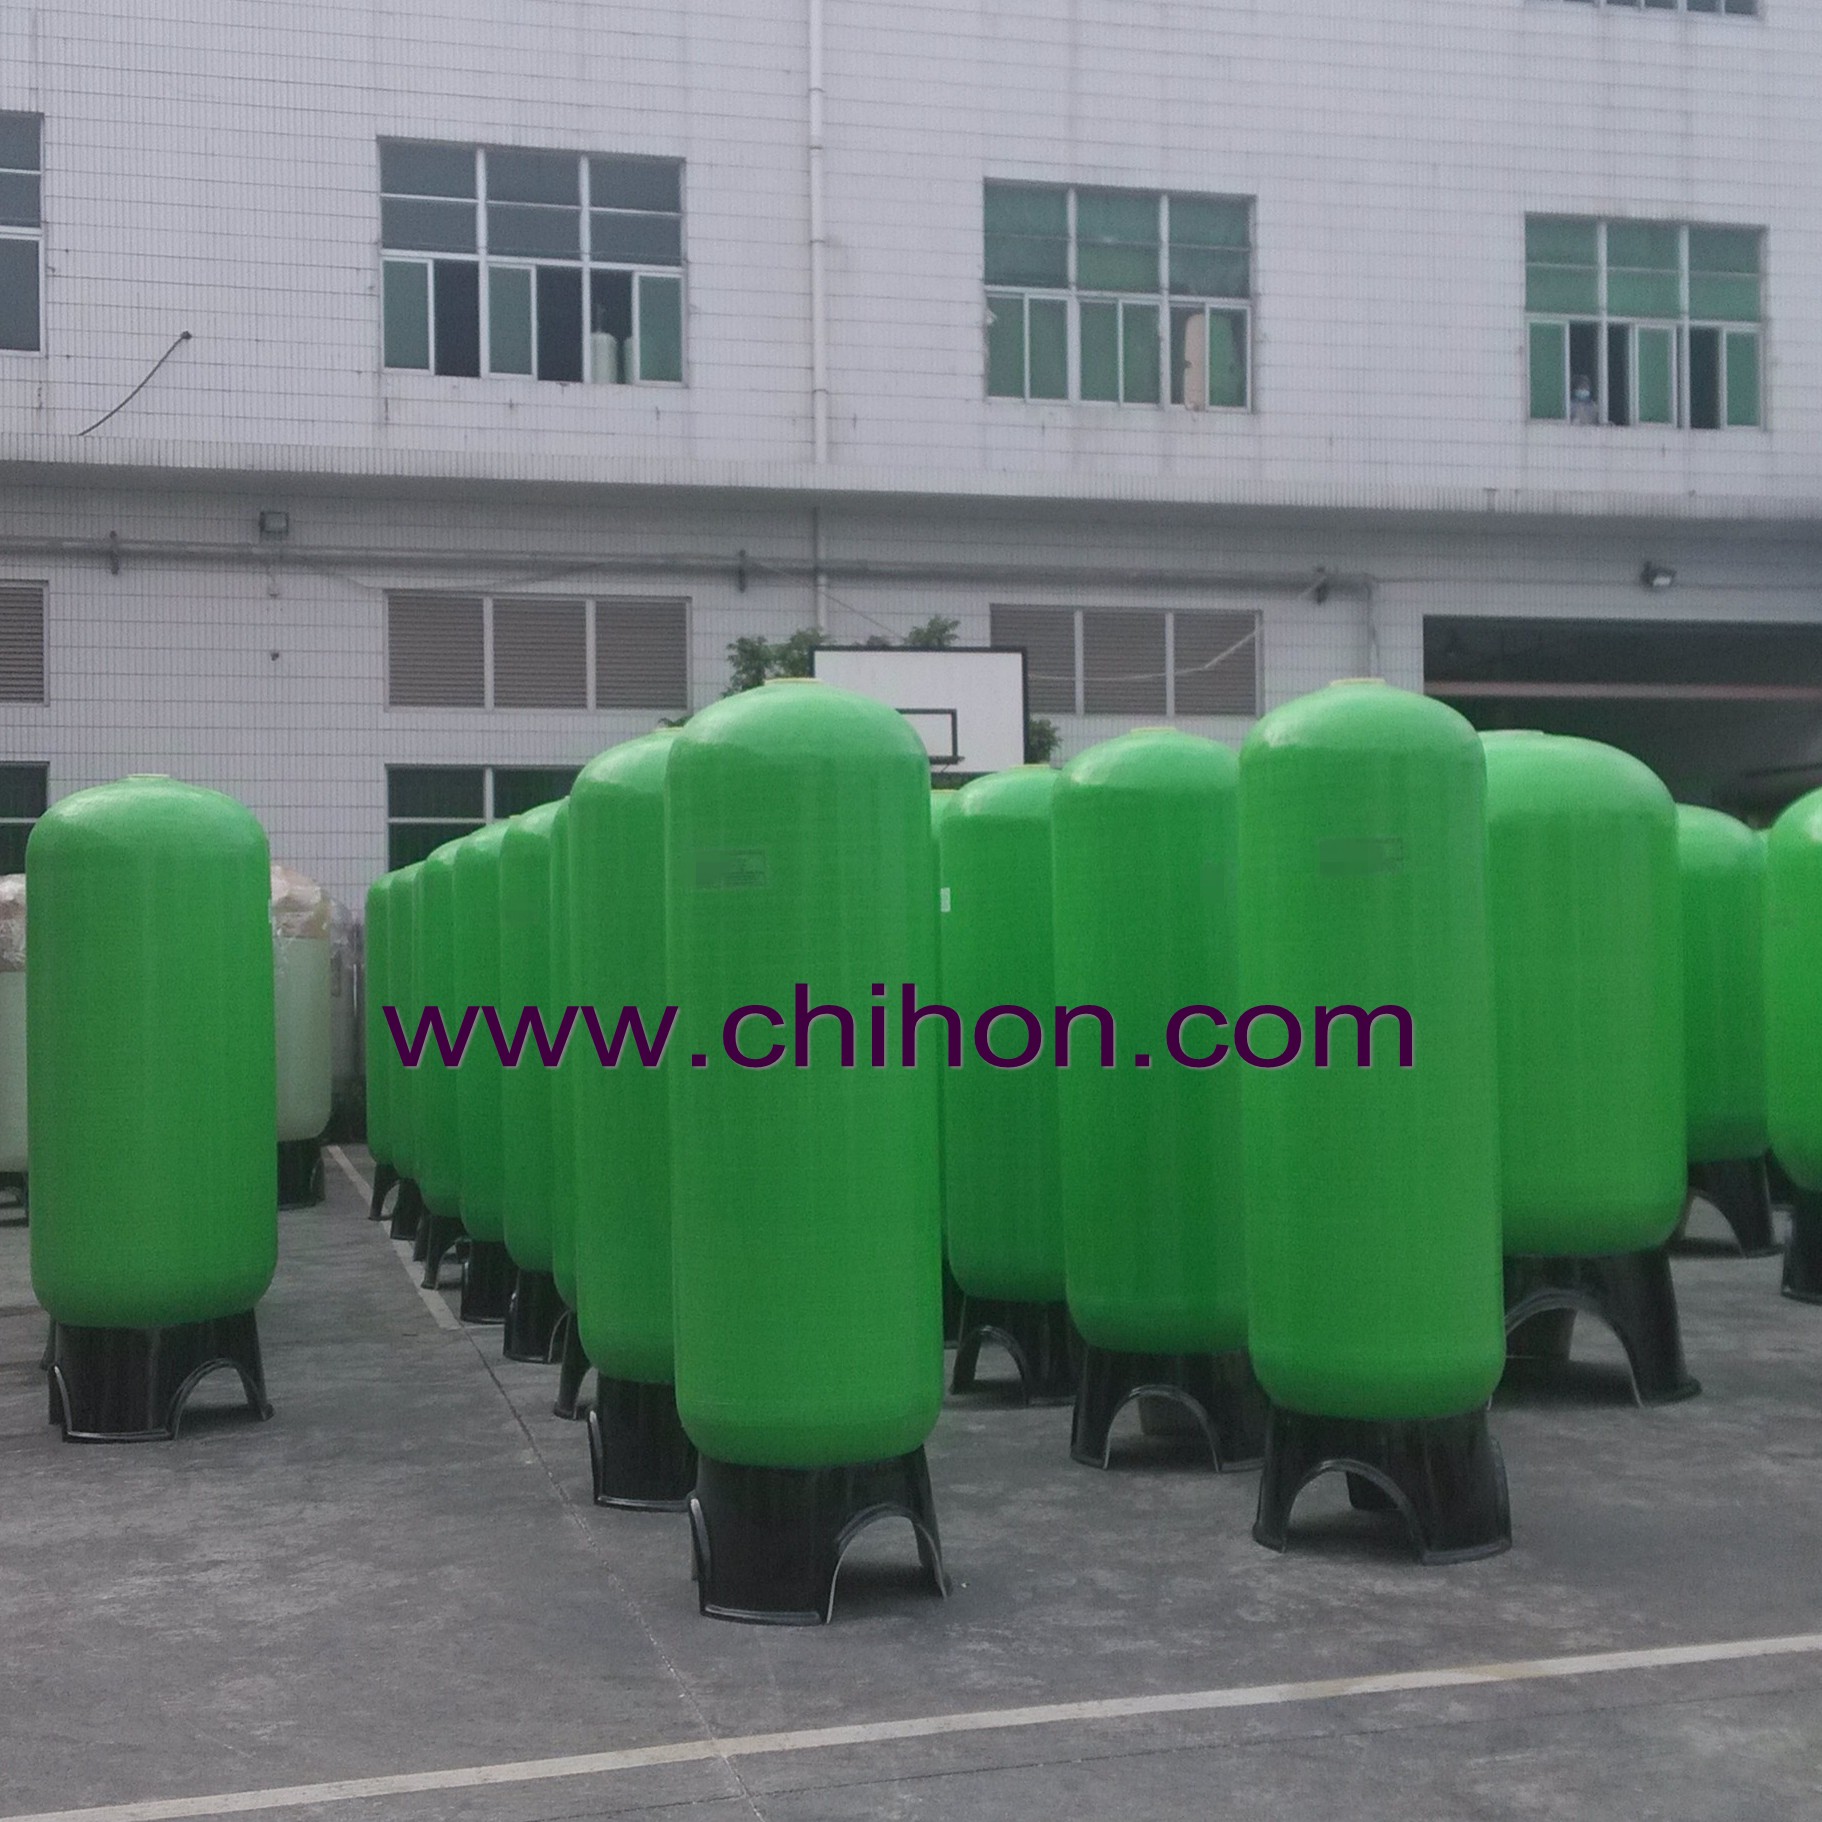 2162 FRP activated carbon filtration tanks plastic filter housing